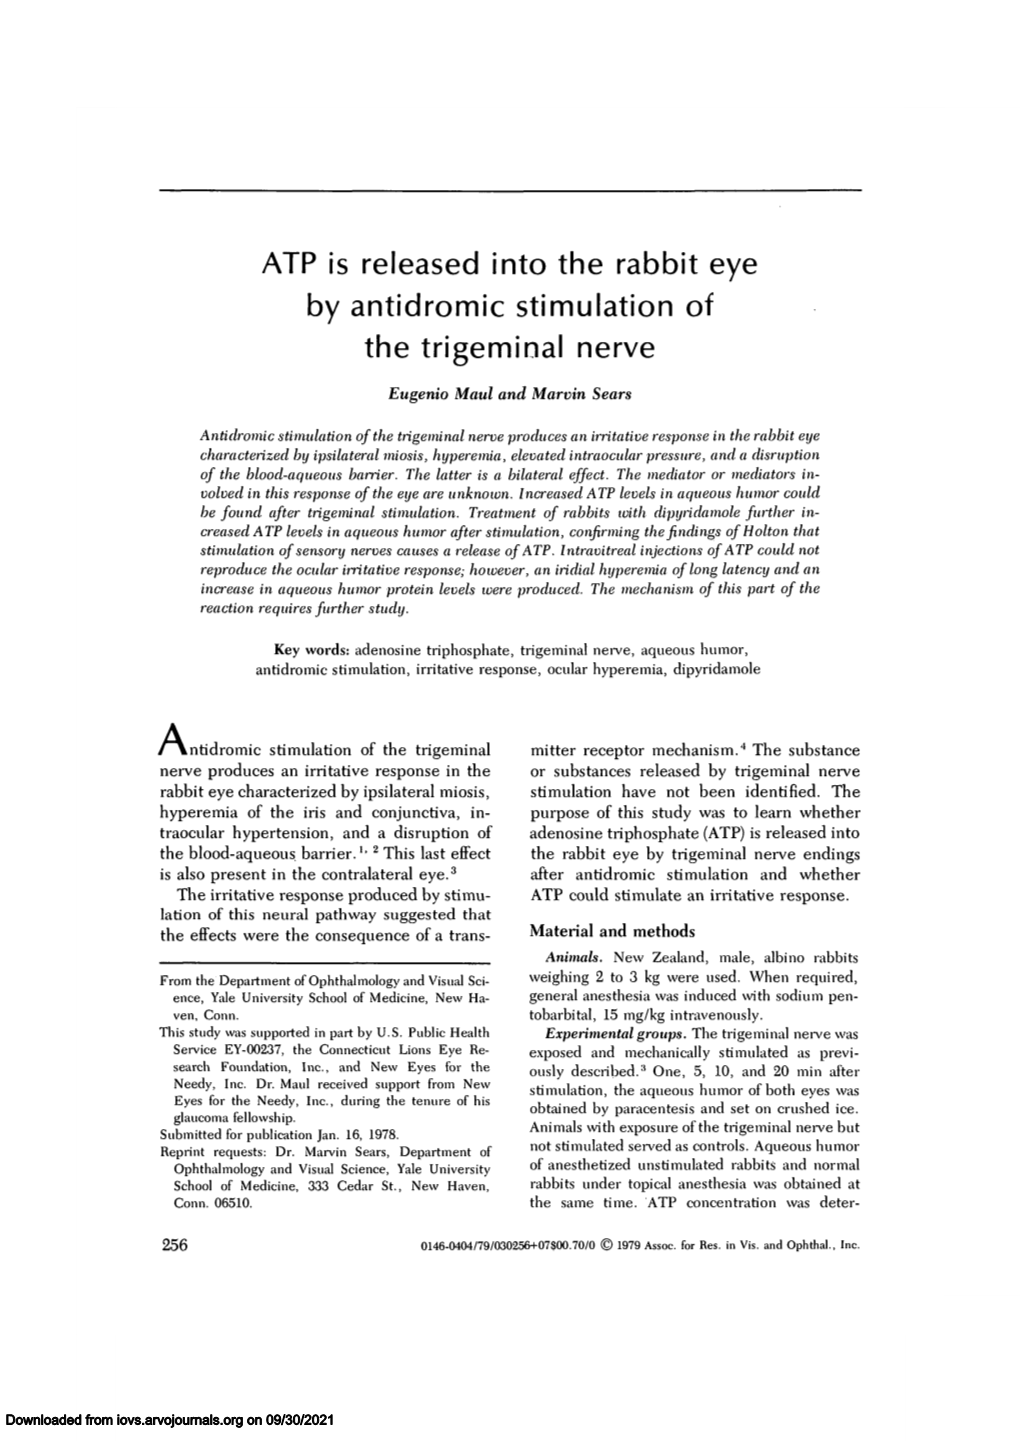 ATP Is Released Into the Rabbit Eye by Antidromic Stimulation of the Trigeminal Nerve